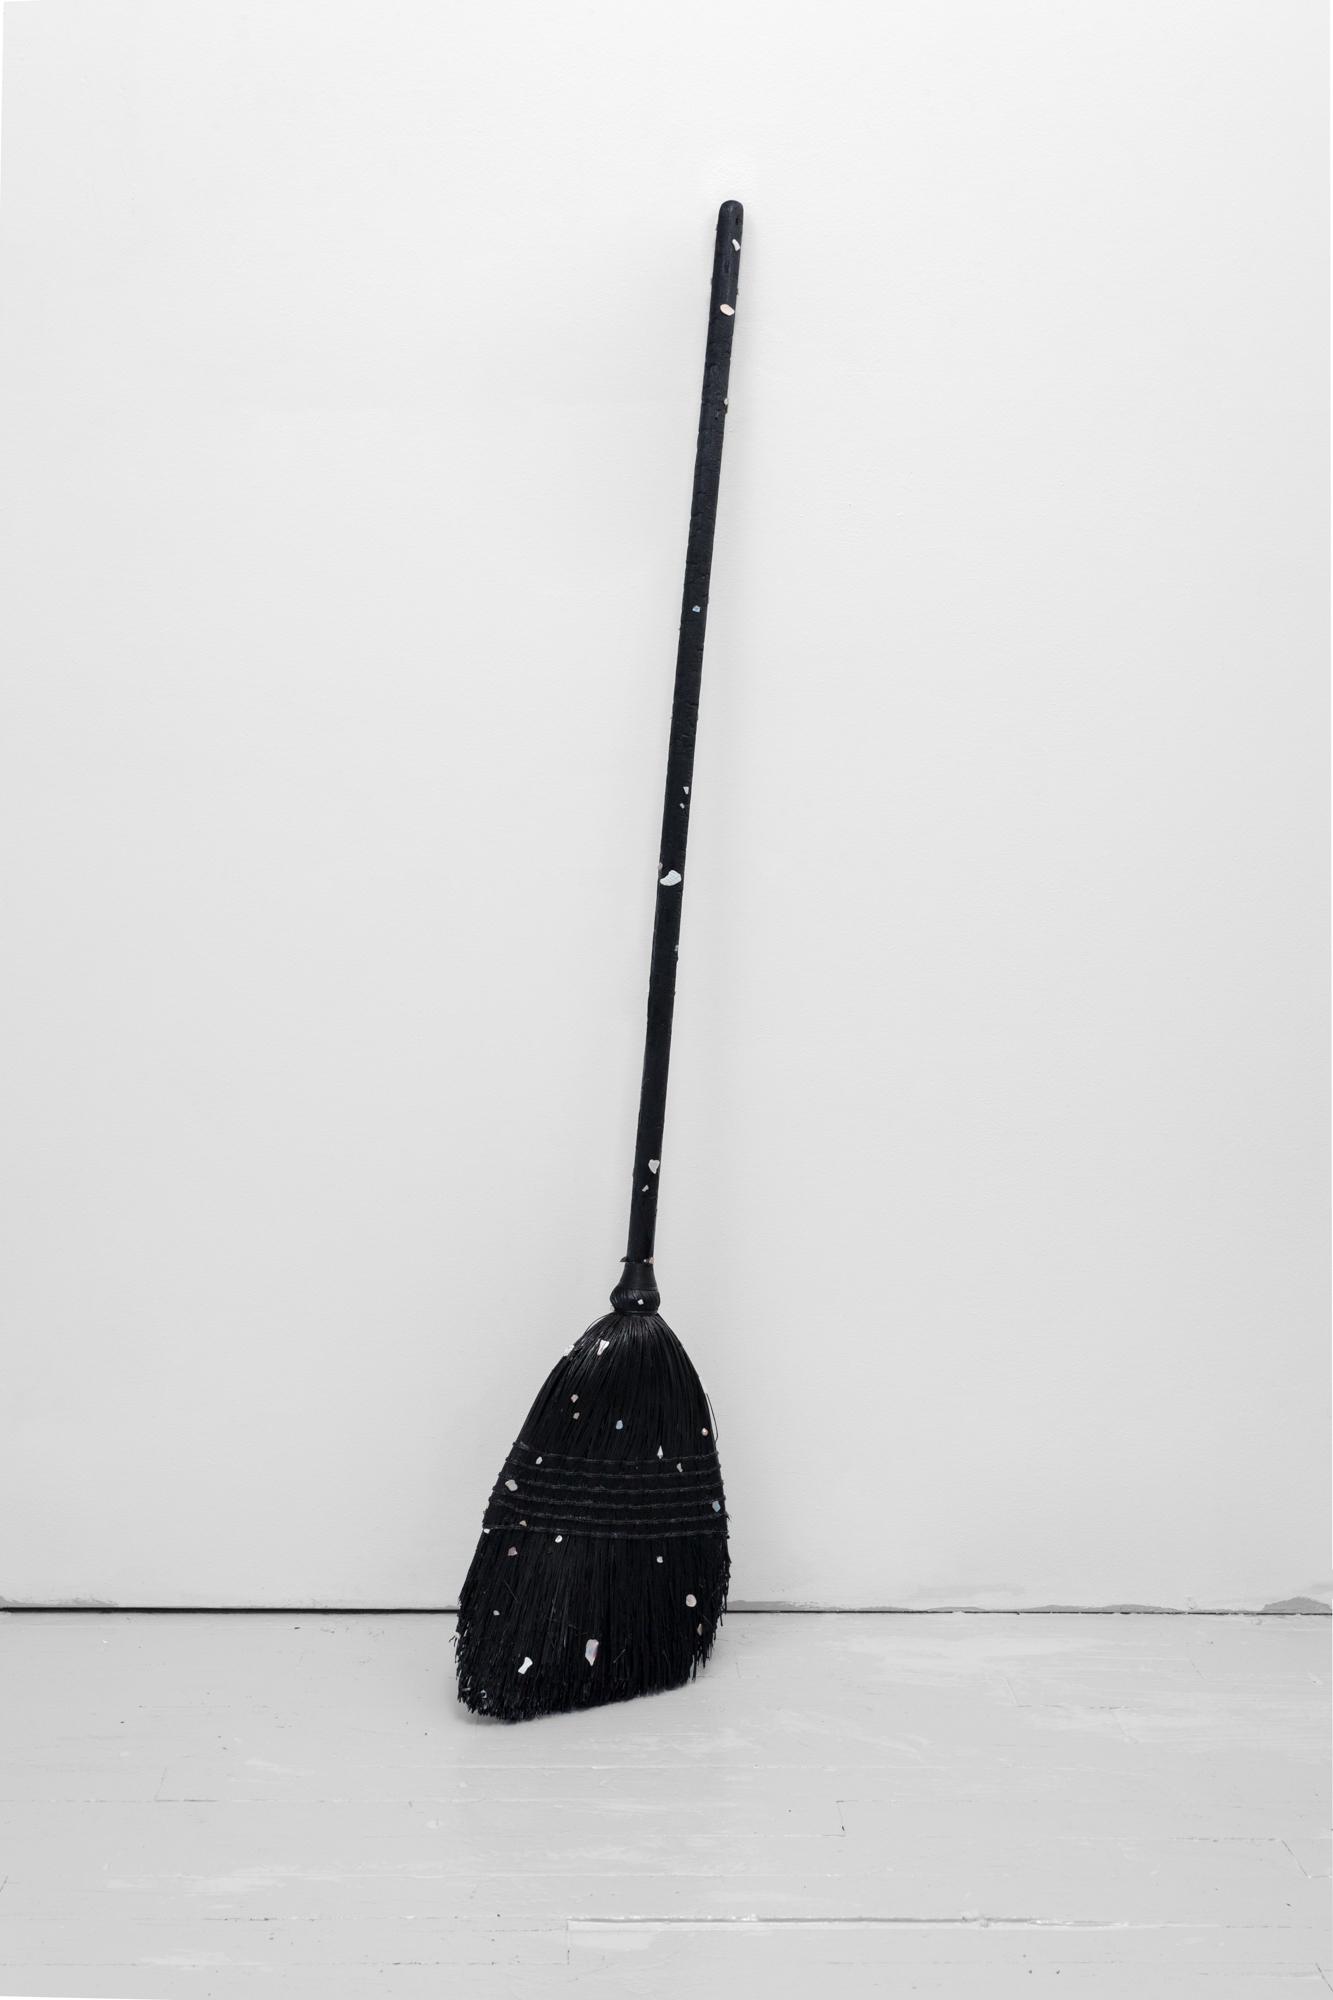 A single charred black broom with white specks leans against a white wall.